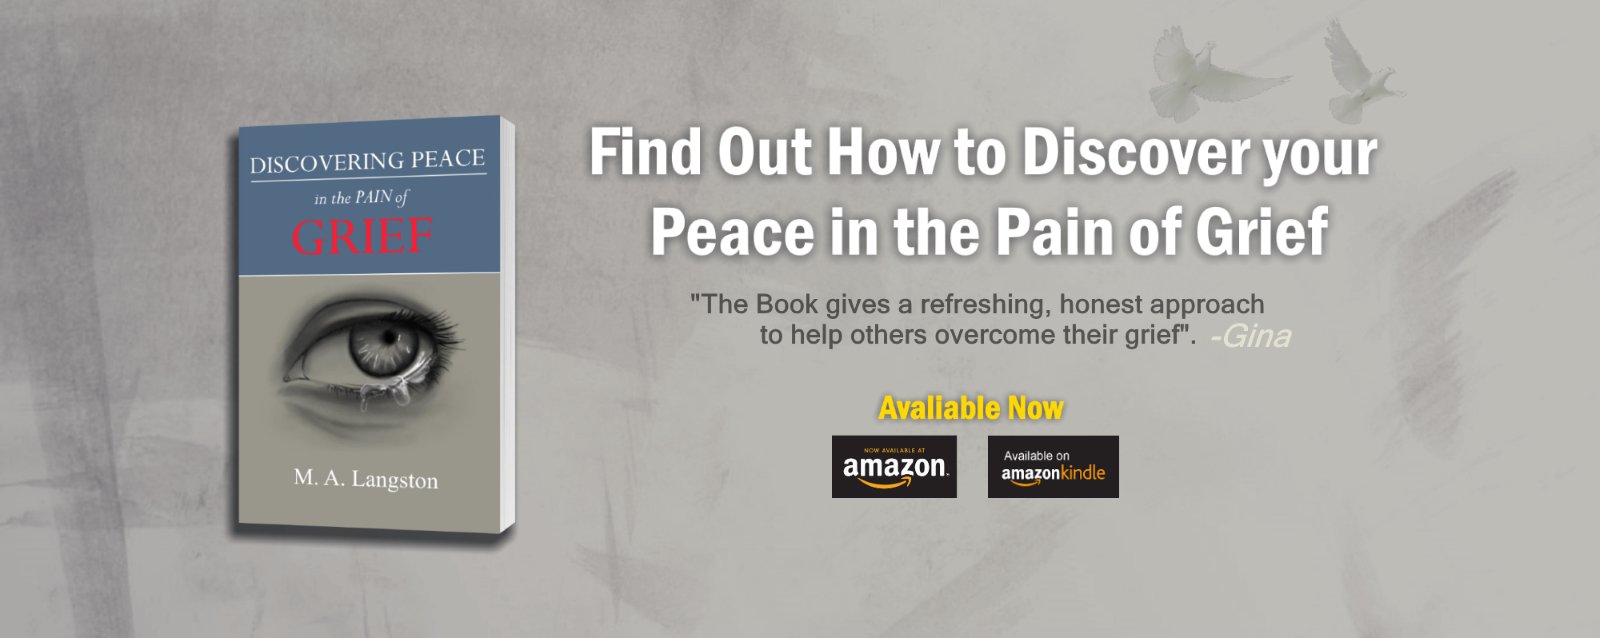 Discovering Peace Book